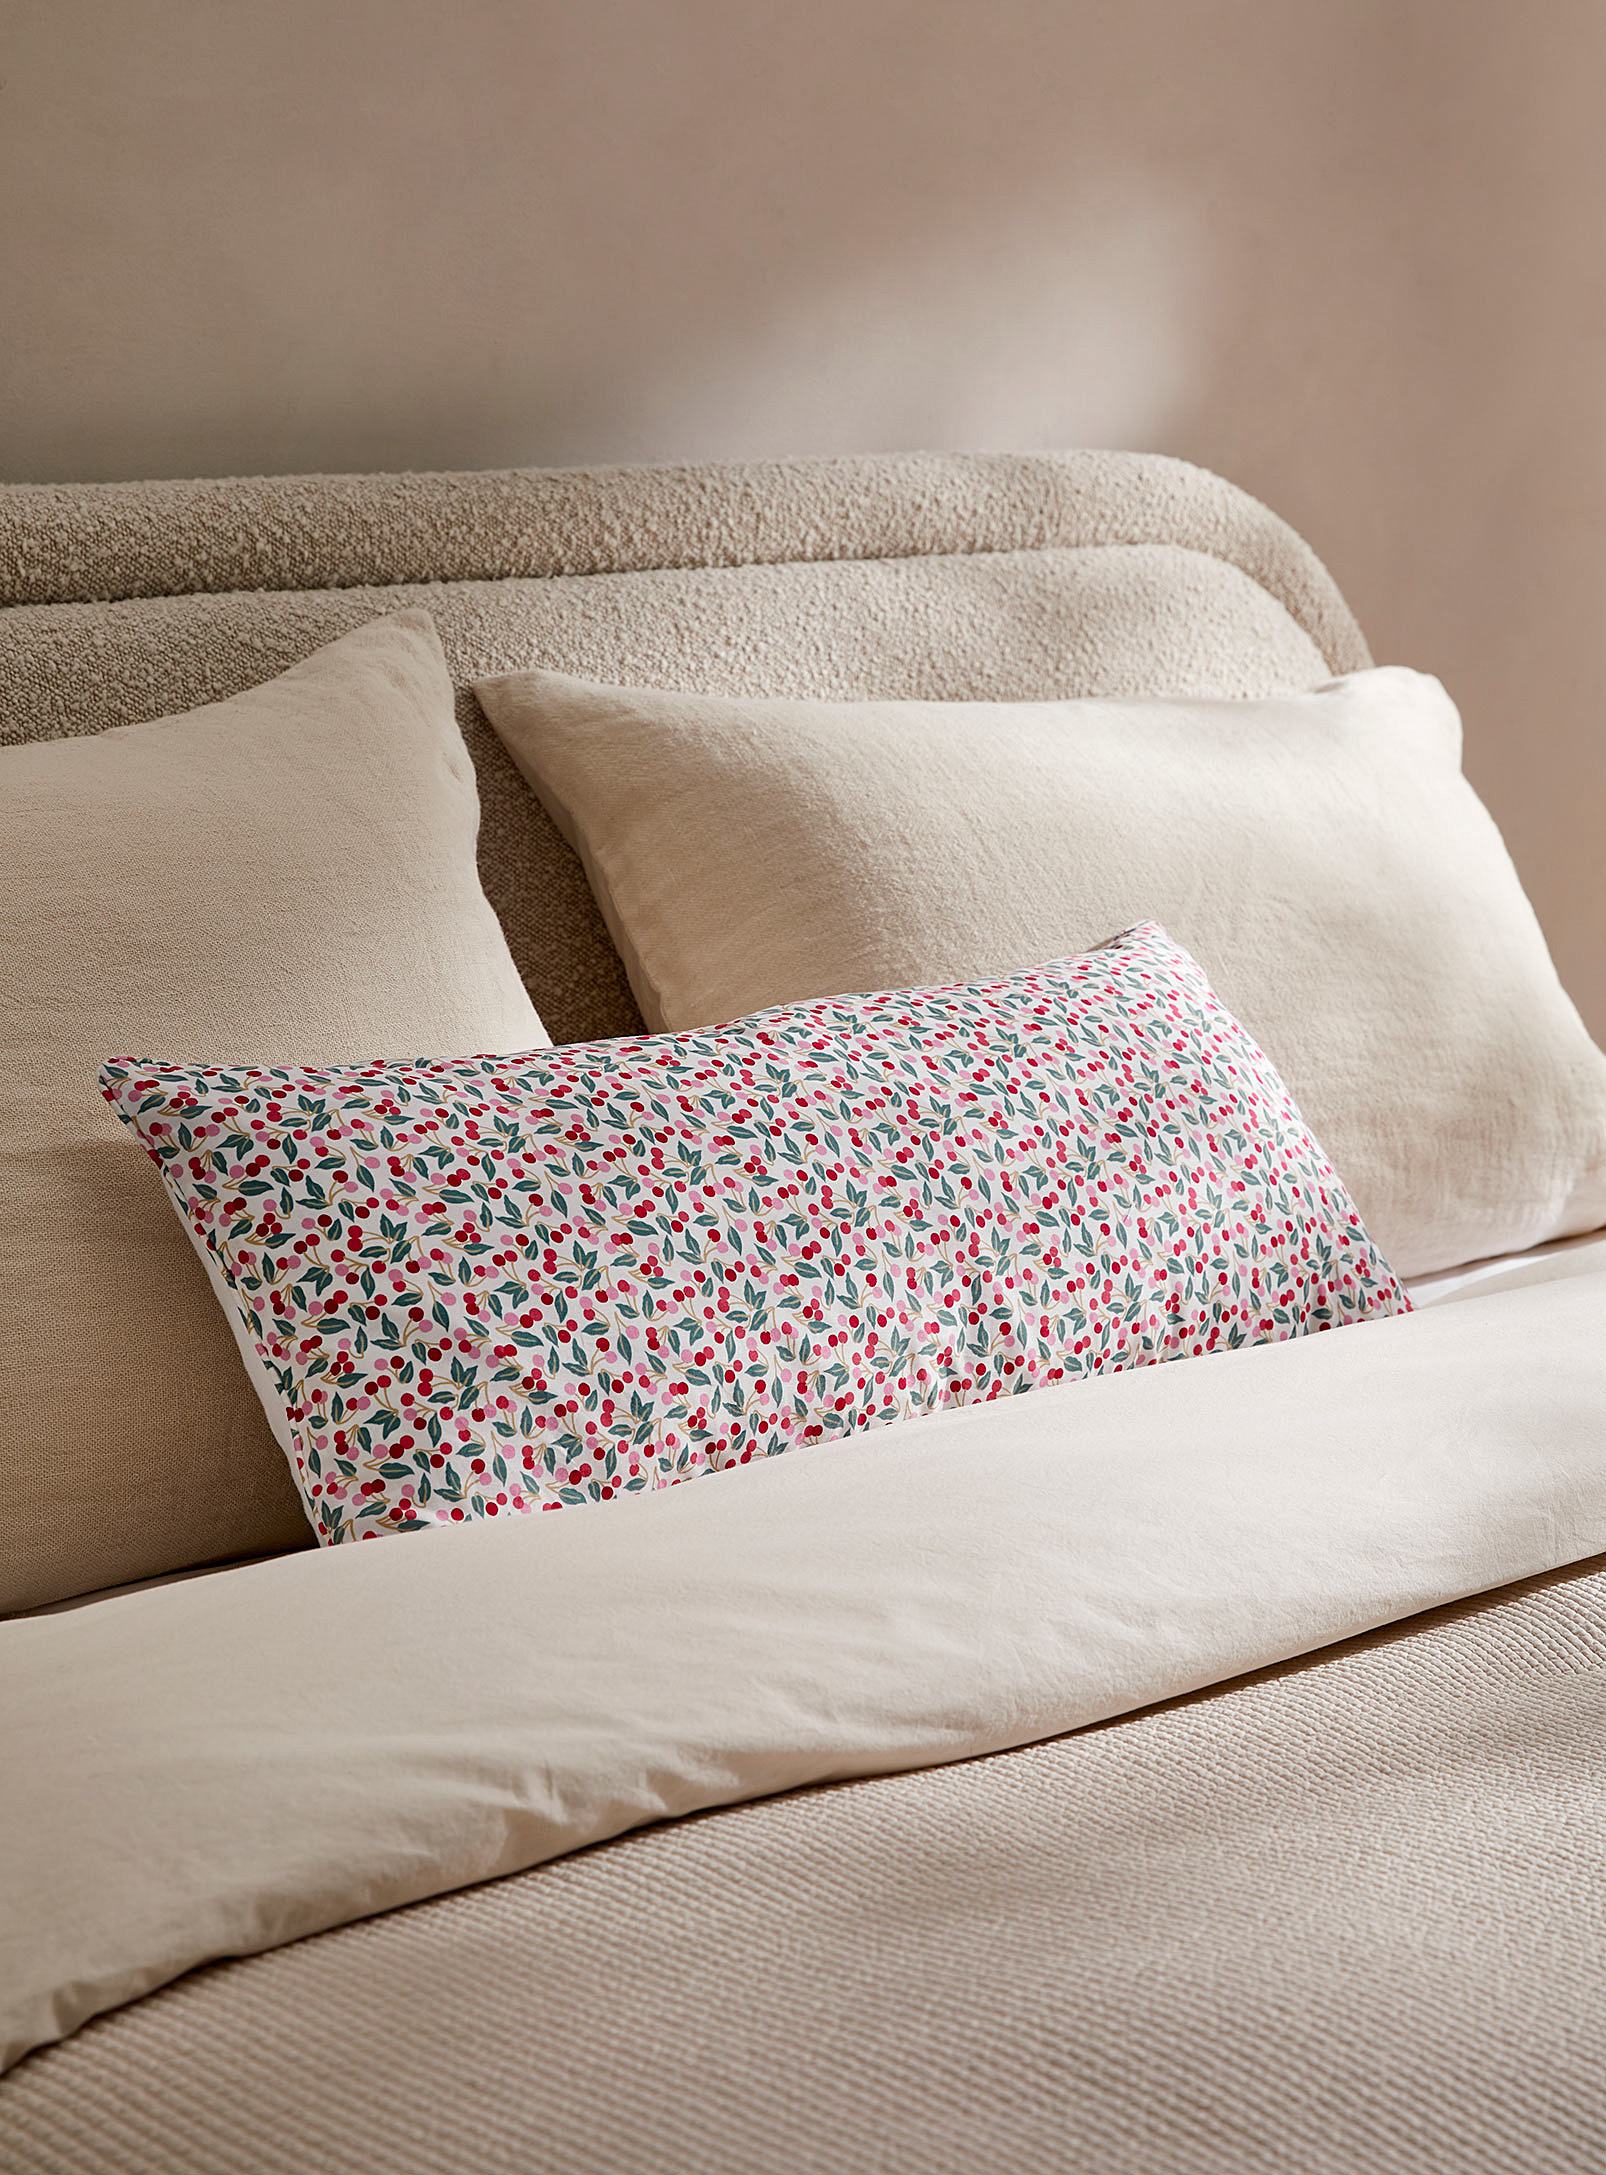 Simons Maison Cherry Drop Cushion Made With Liberty Fabric 30 X 50 Cm In Assorted